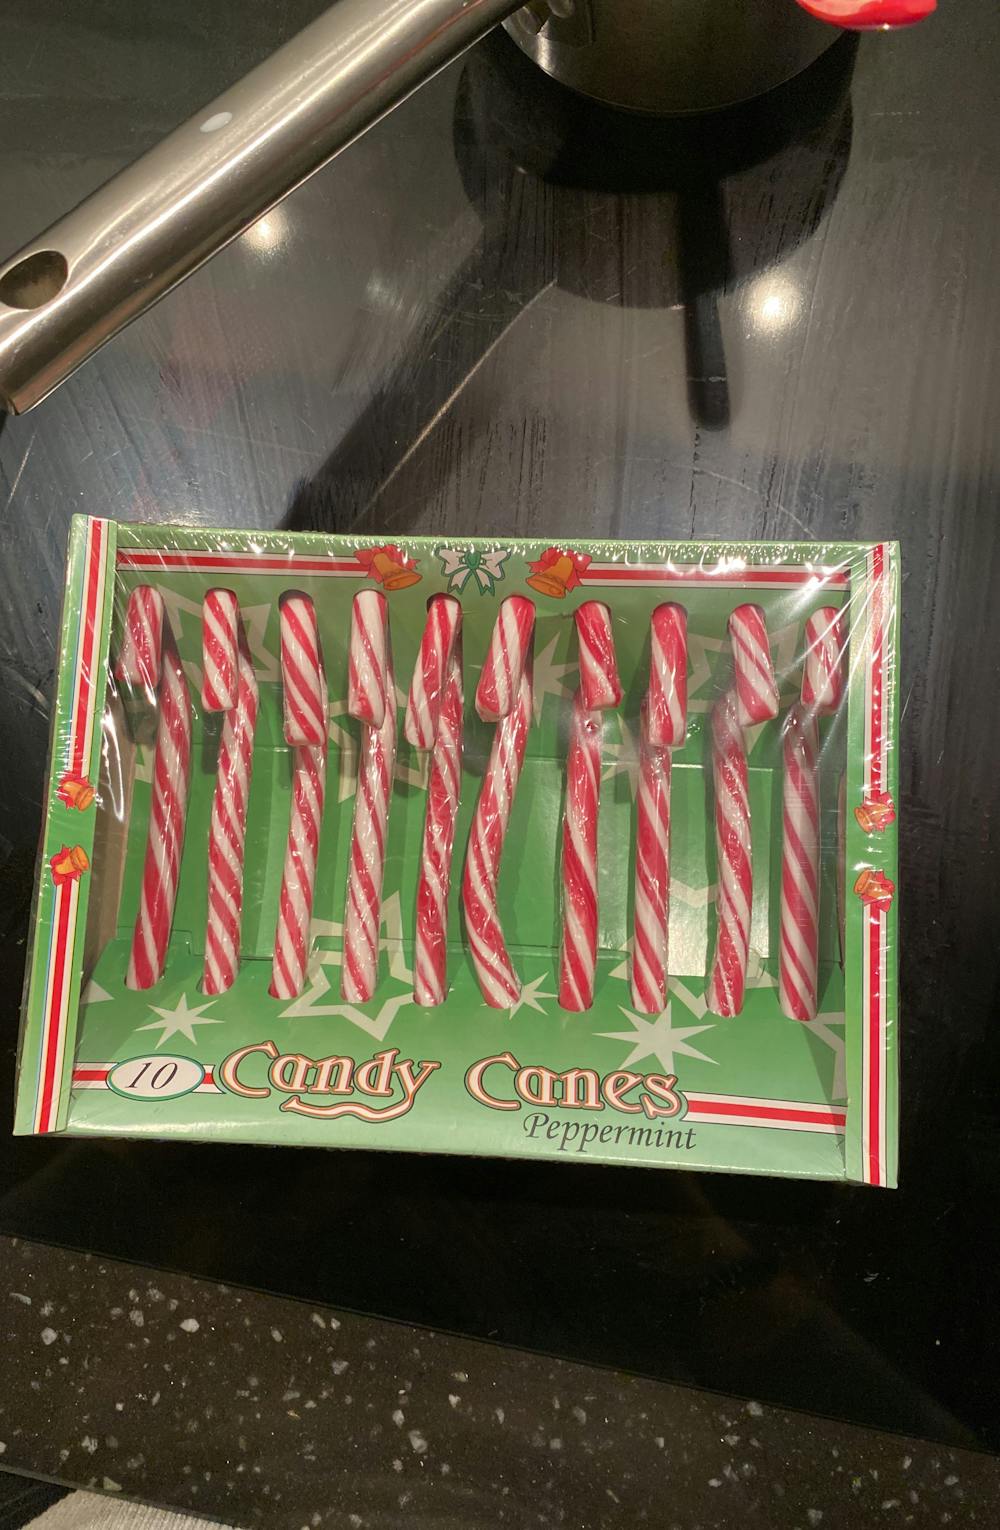 Candy canes peppermint, 